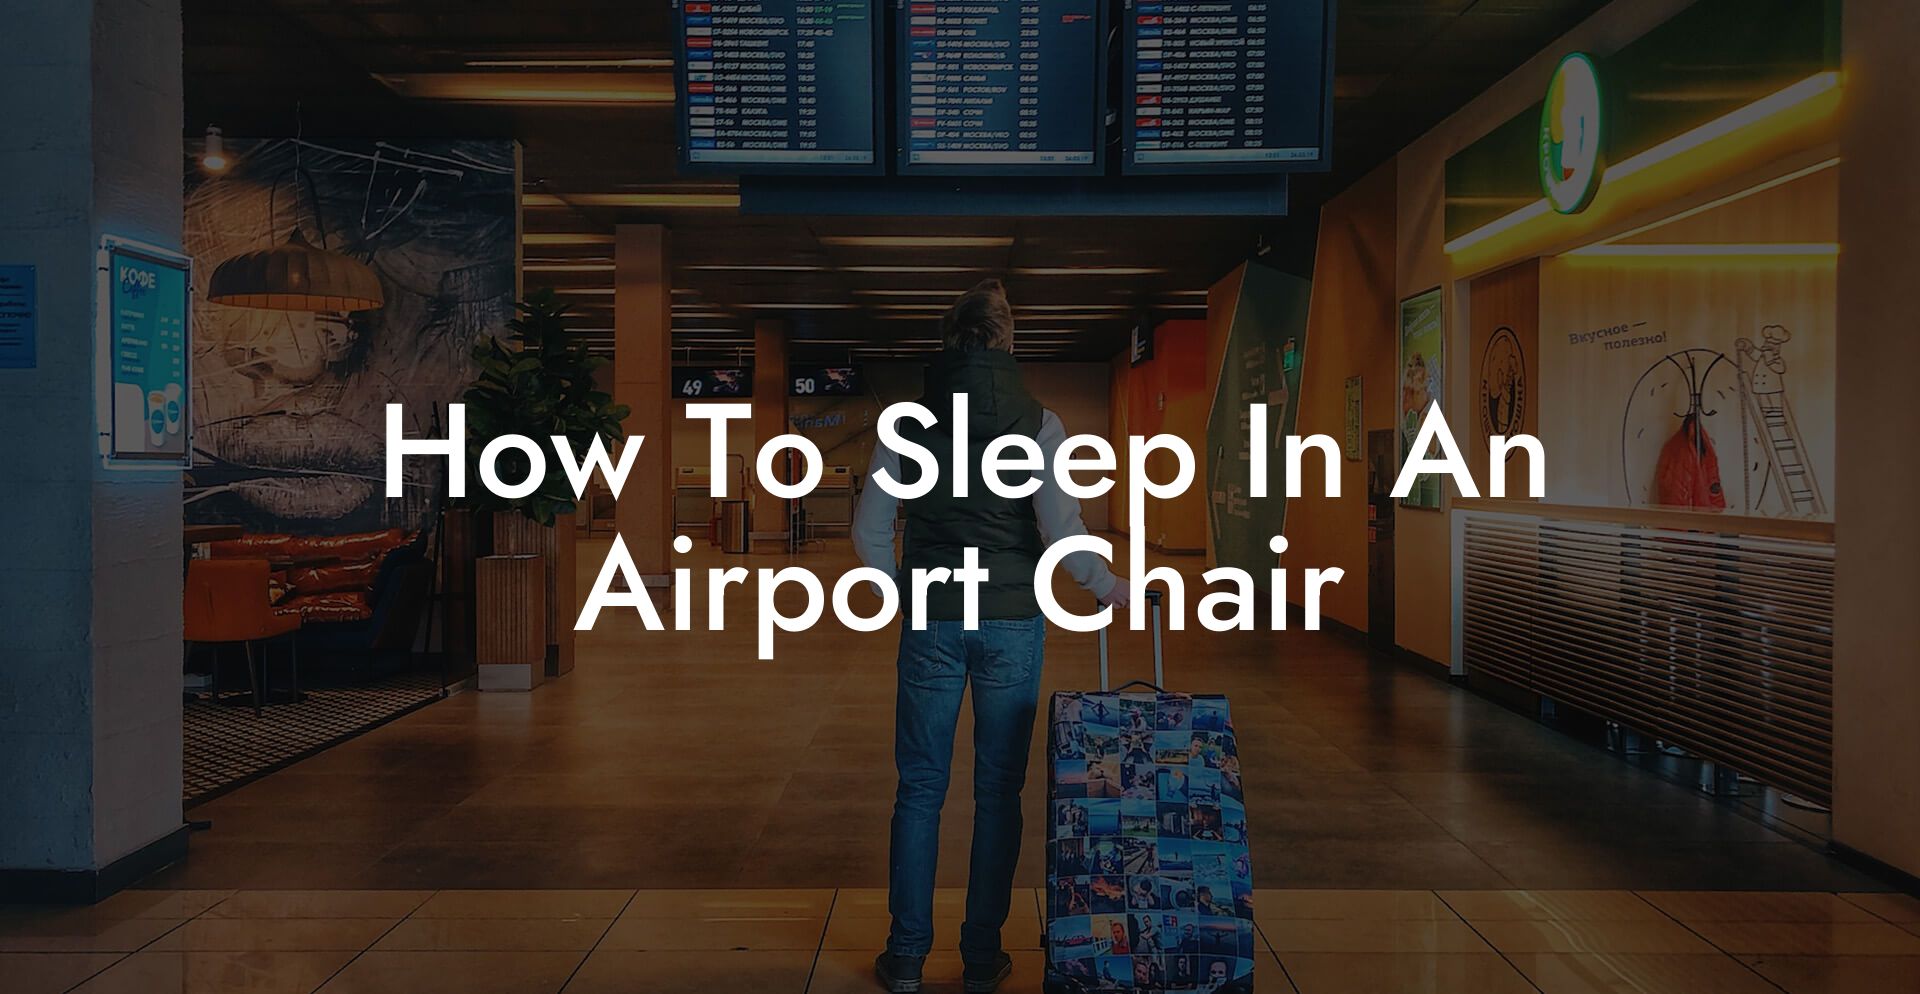 How To Sleep In An Airport Chair